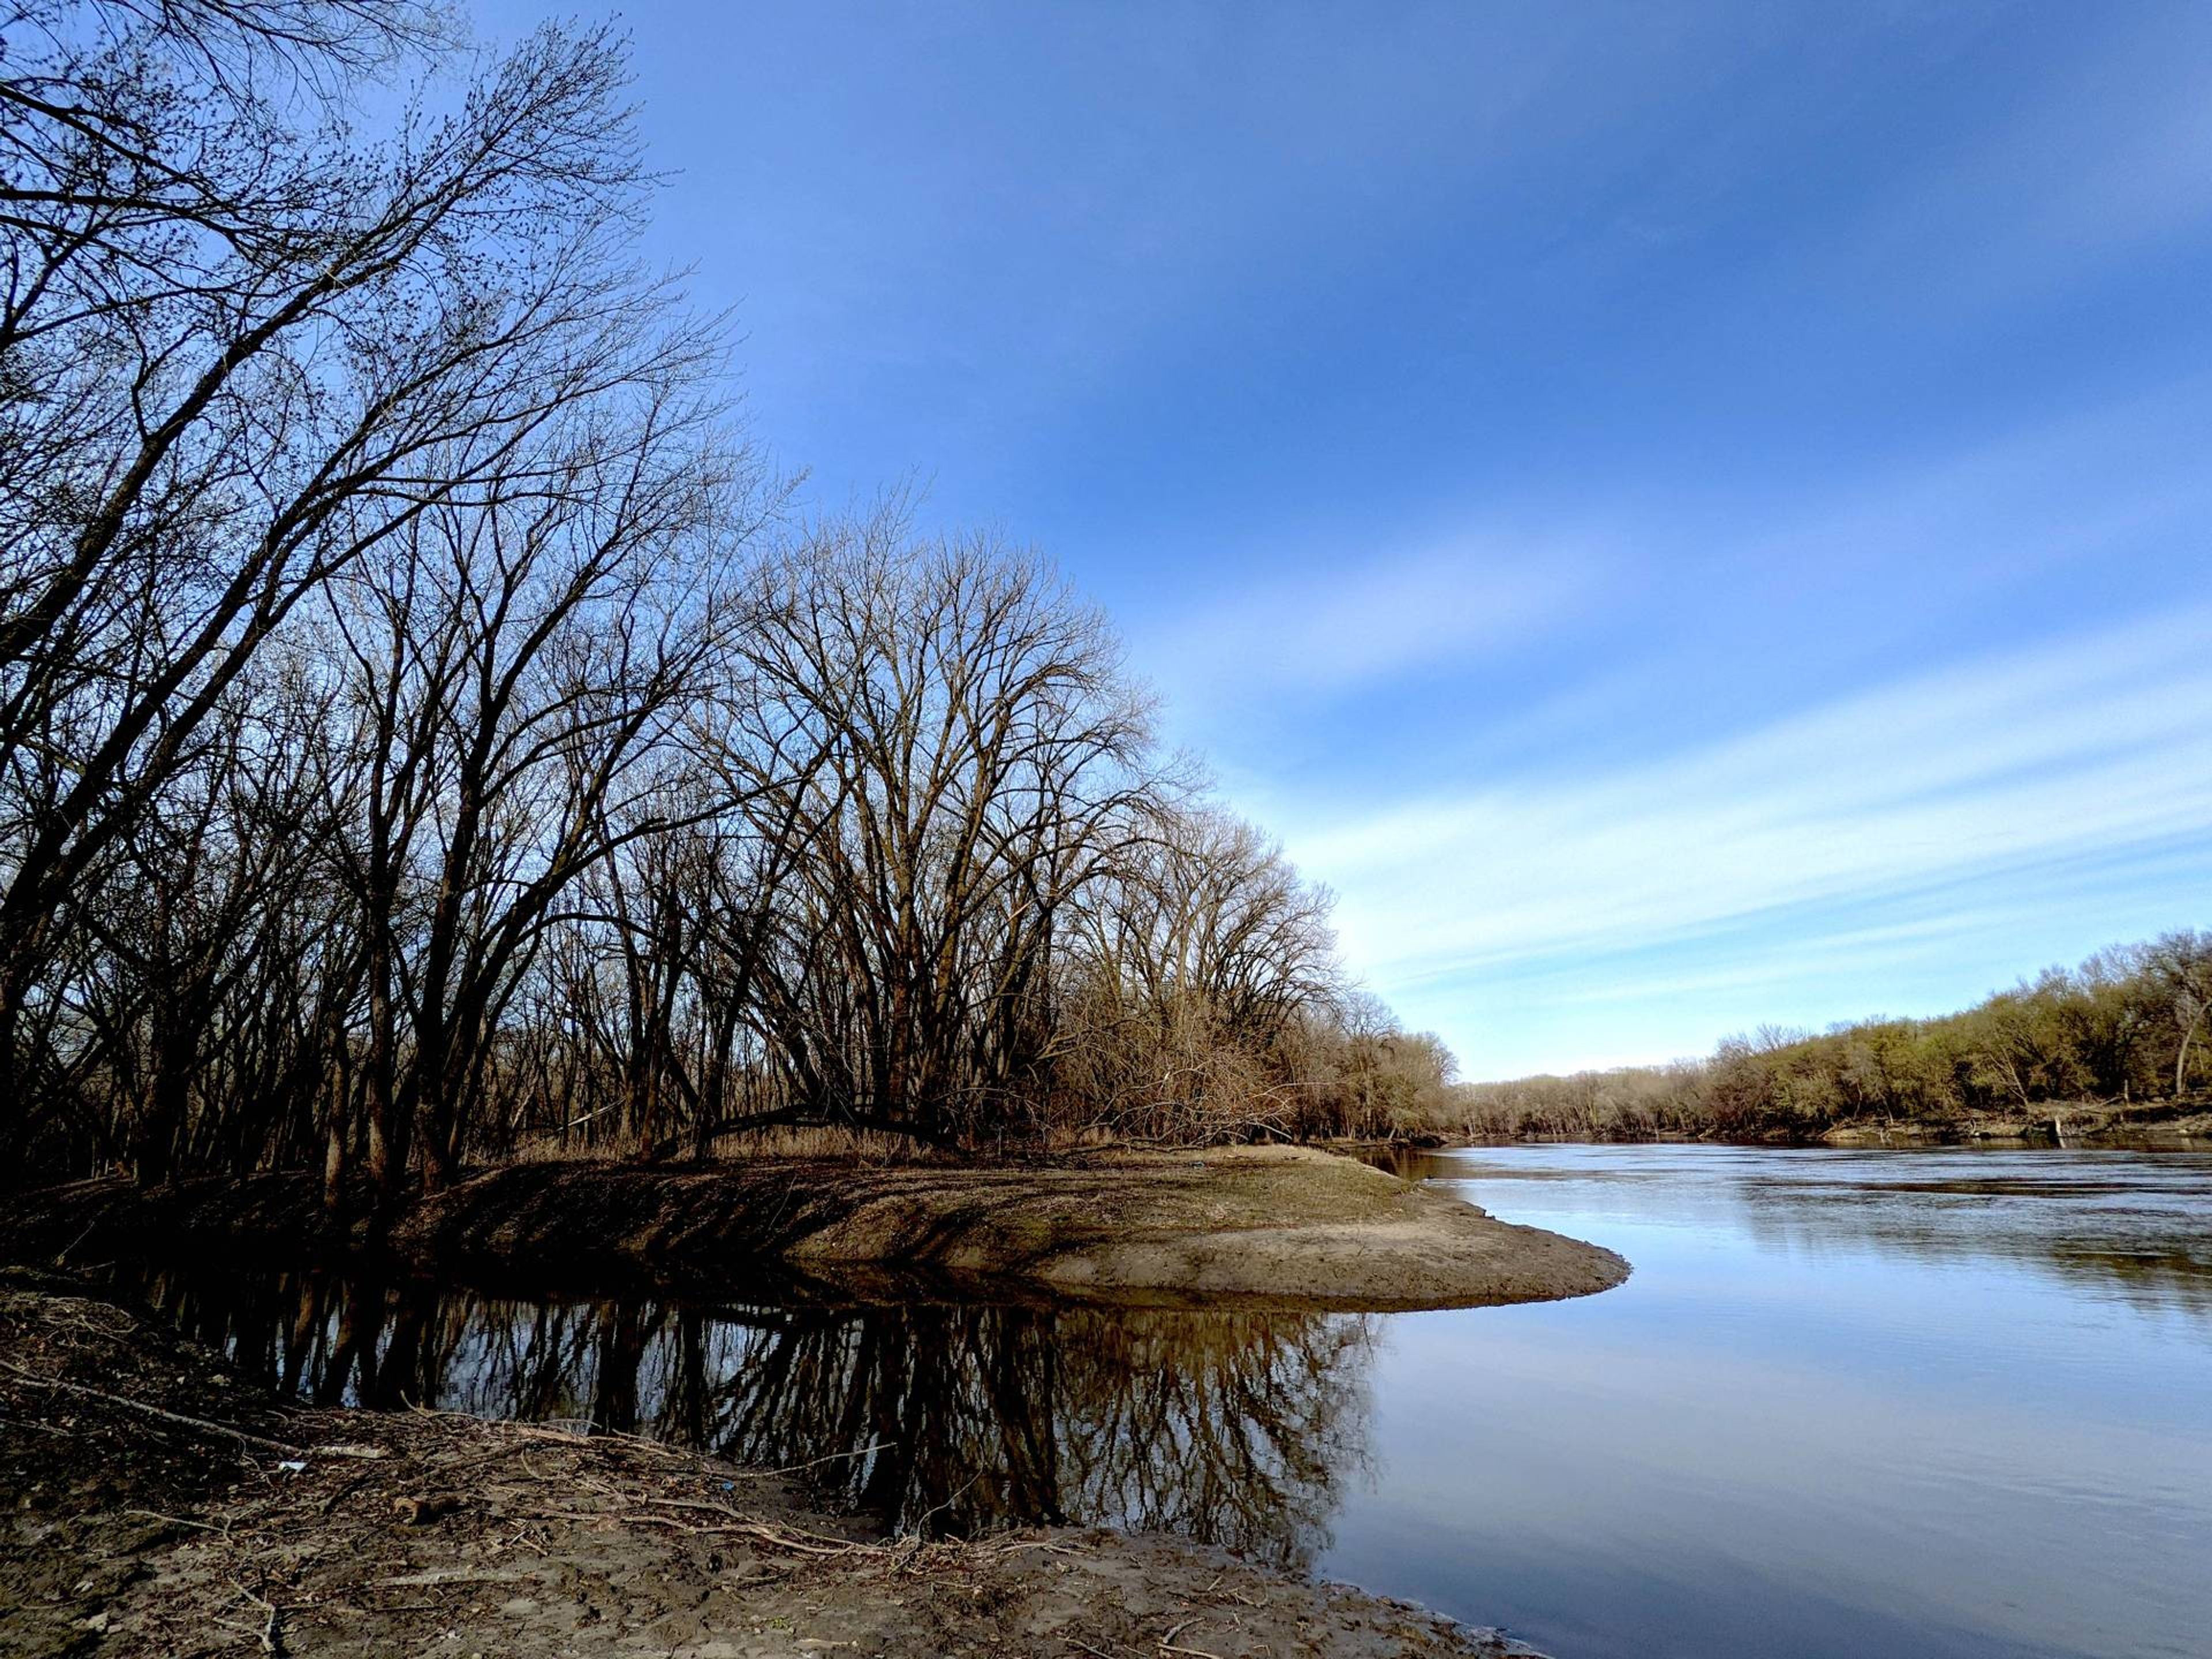 photo of a river, blue sky, no leaves on trees